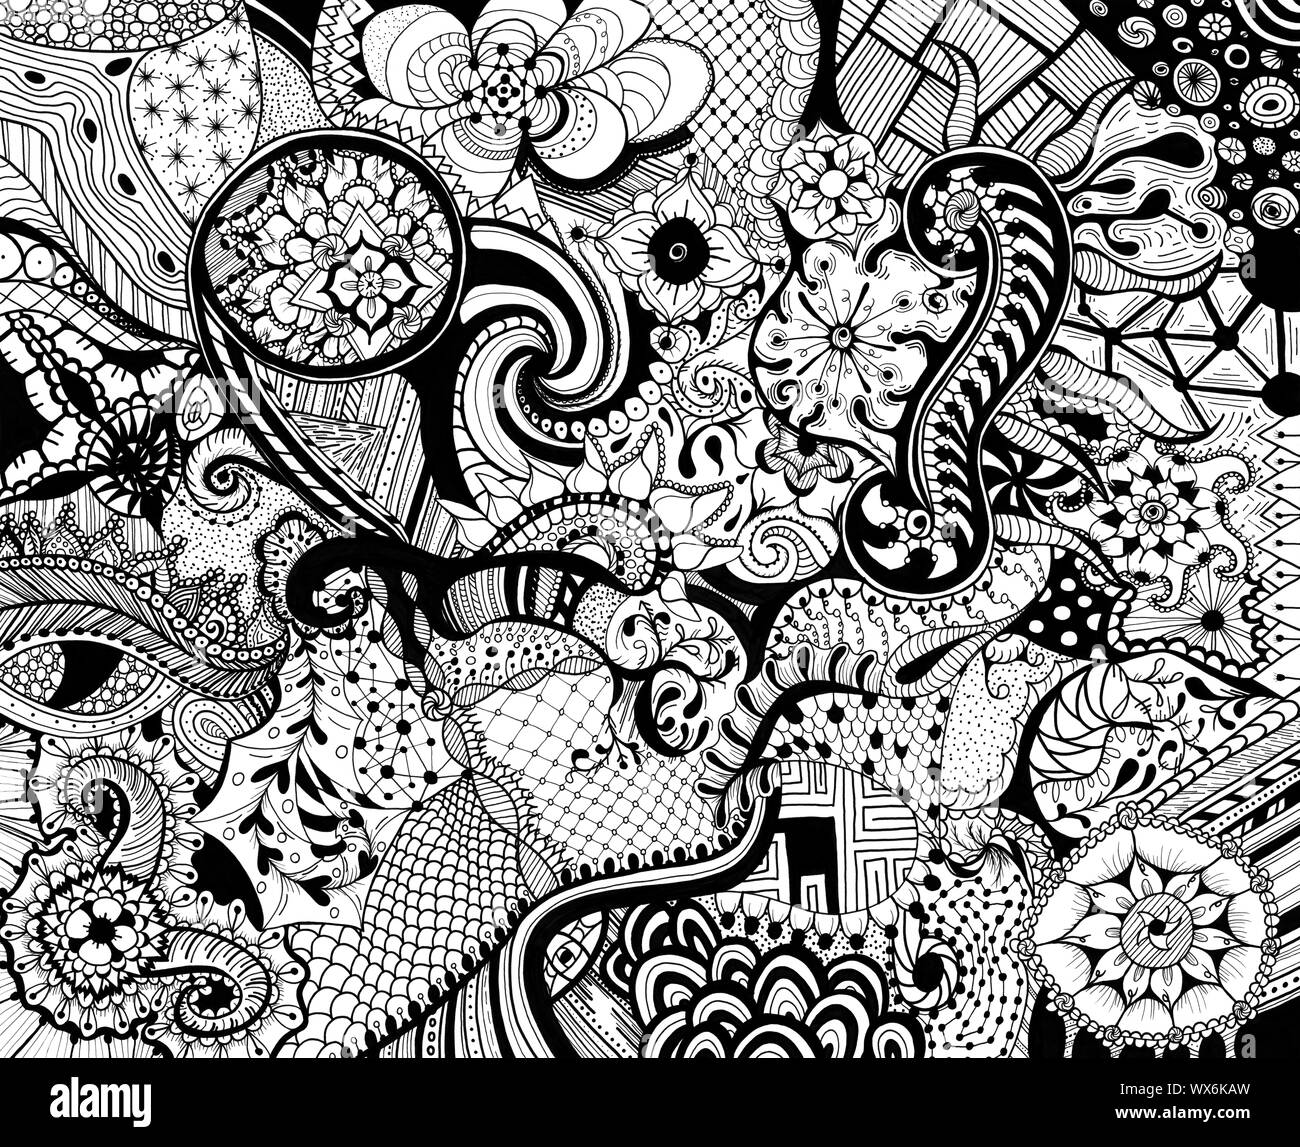 Hand drawn black and white abstract doodle sketch drawing Stock Photo